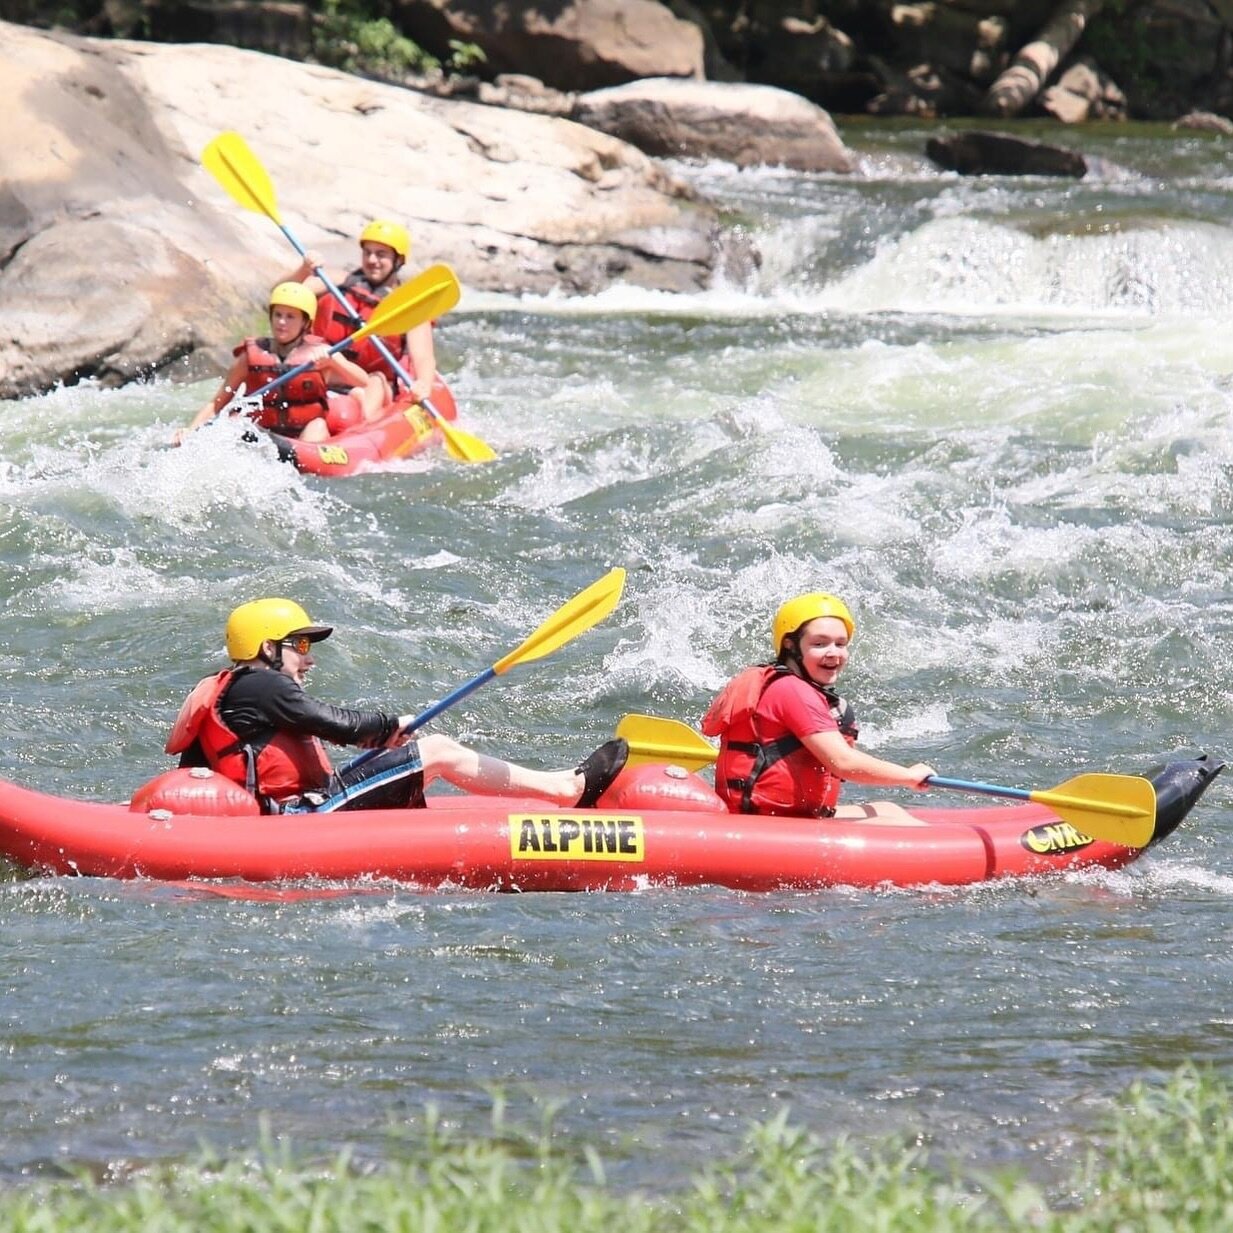 National Geographic named it in the Top 20 &ldquo;BEST OF THE WORLD&rdquo; Travel Experiences for 2024: whitewater rafting in the New River Gorge National Park!

Come raft with the only Christian licensed outfitter on the river. With 40+ years experi